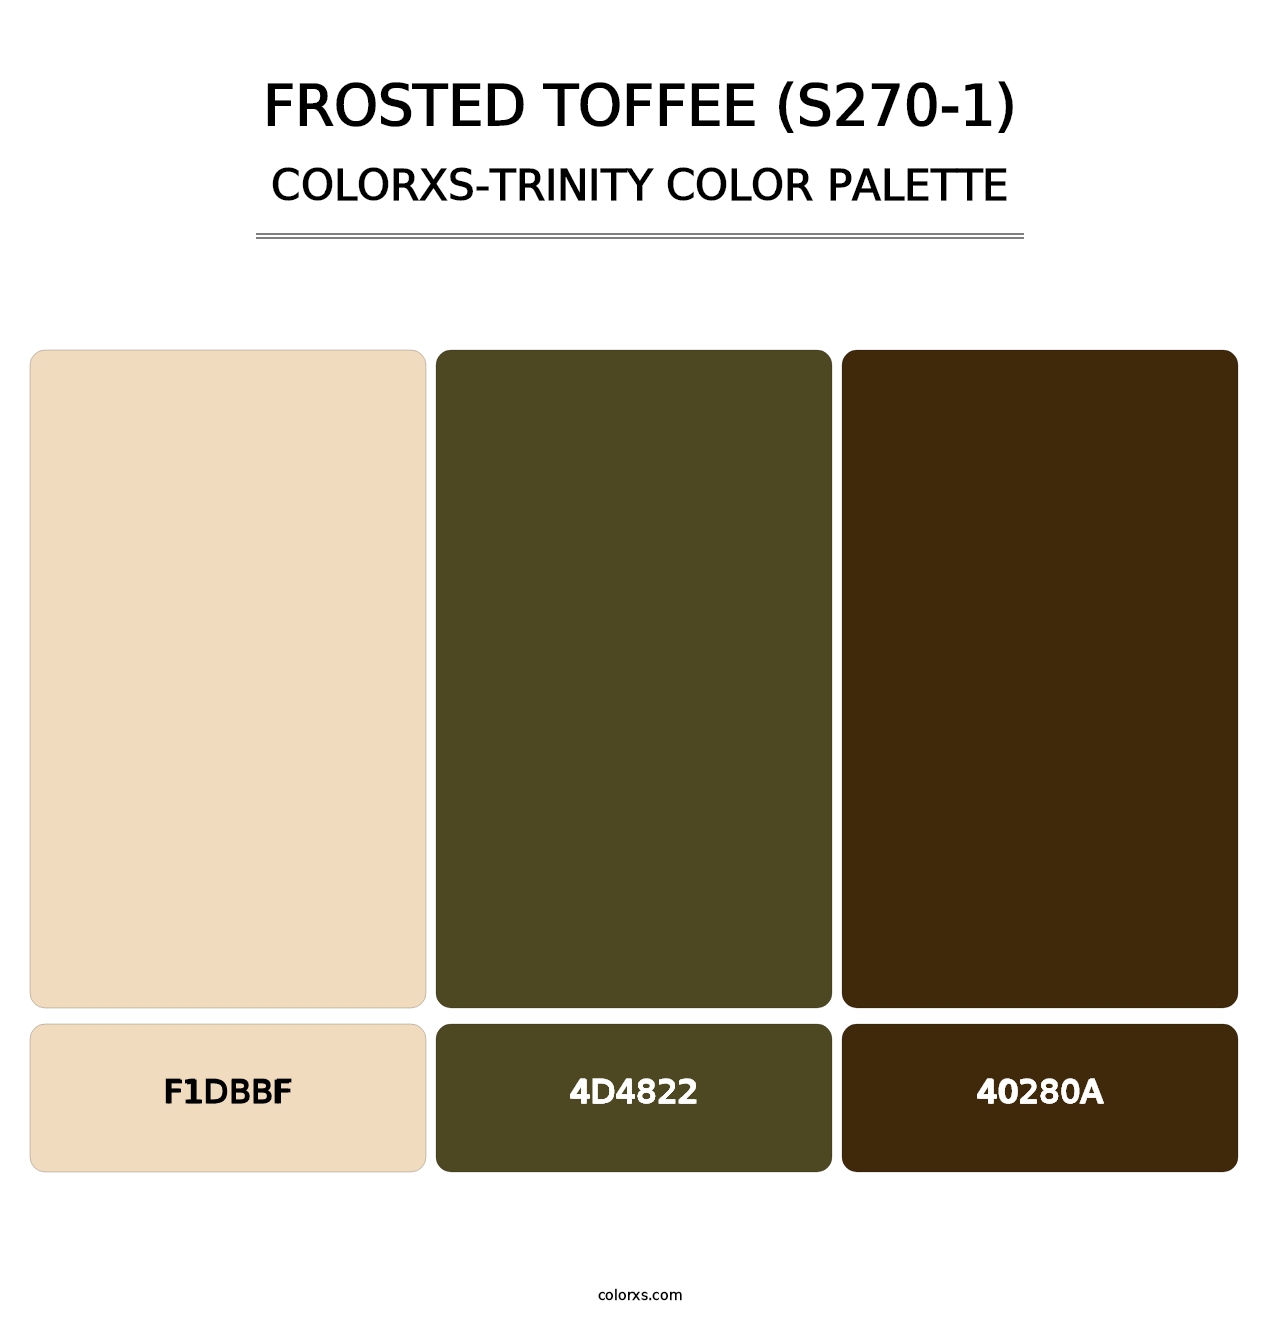 Frosted Toffee (S270-1) - Colorxs Trinity Palette